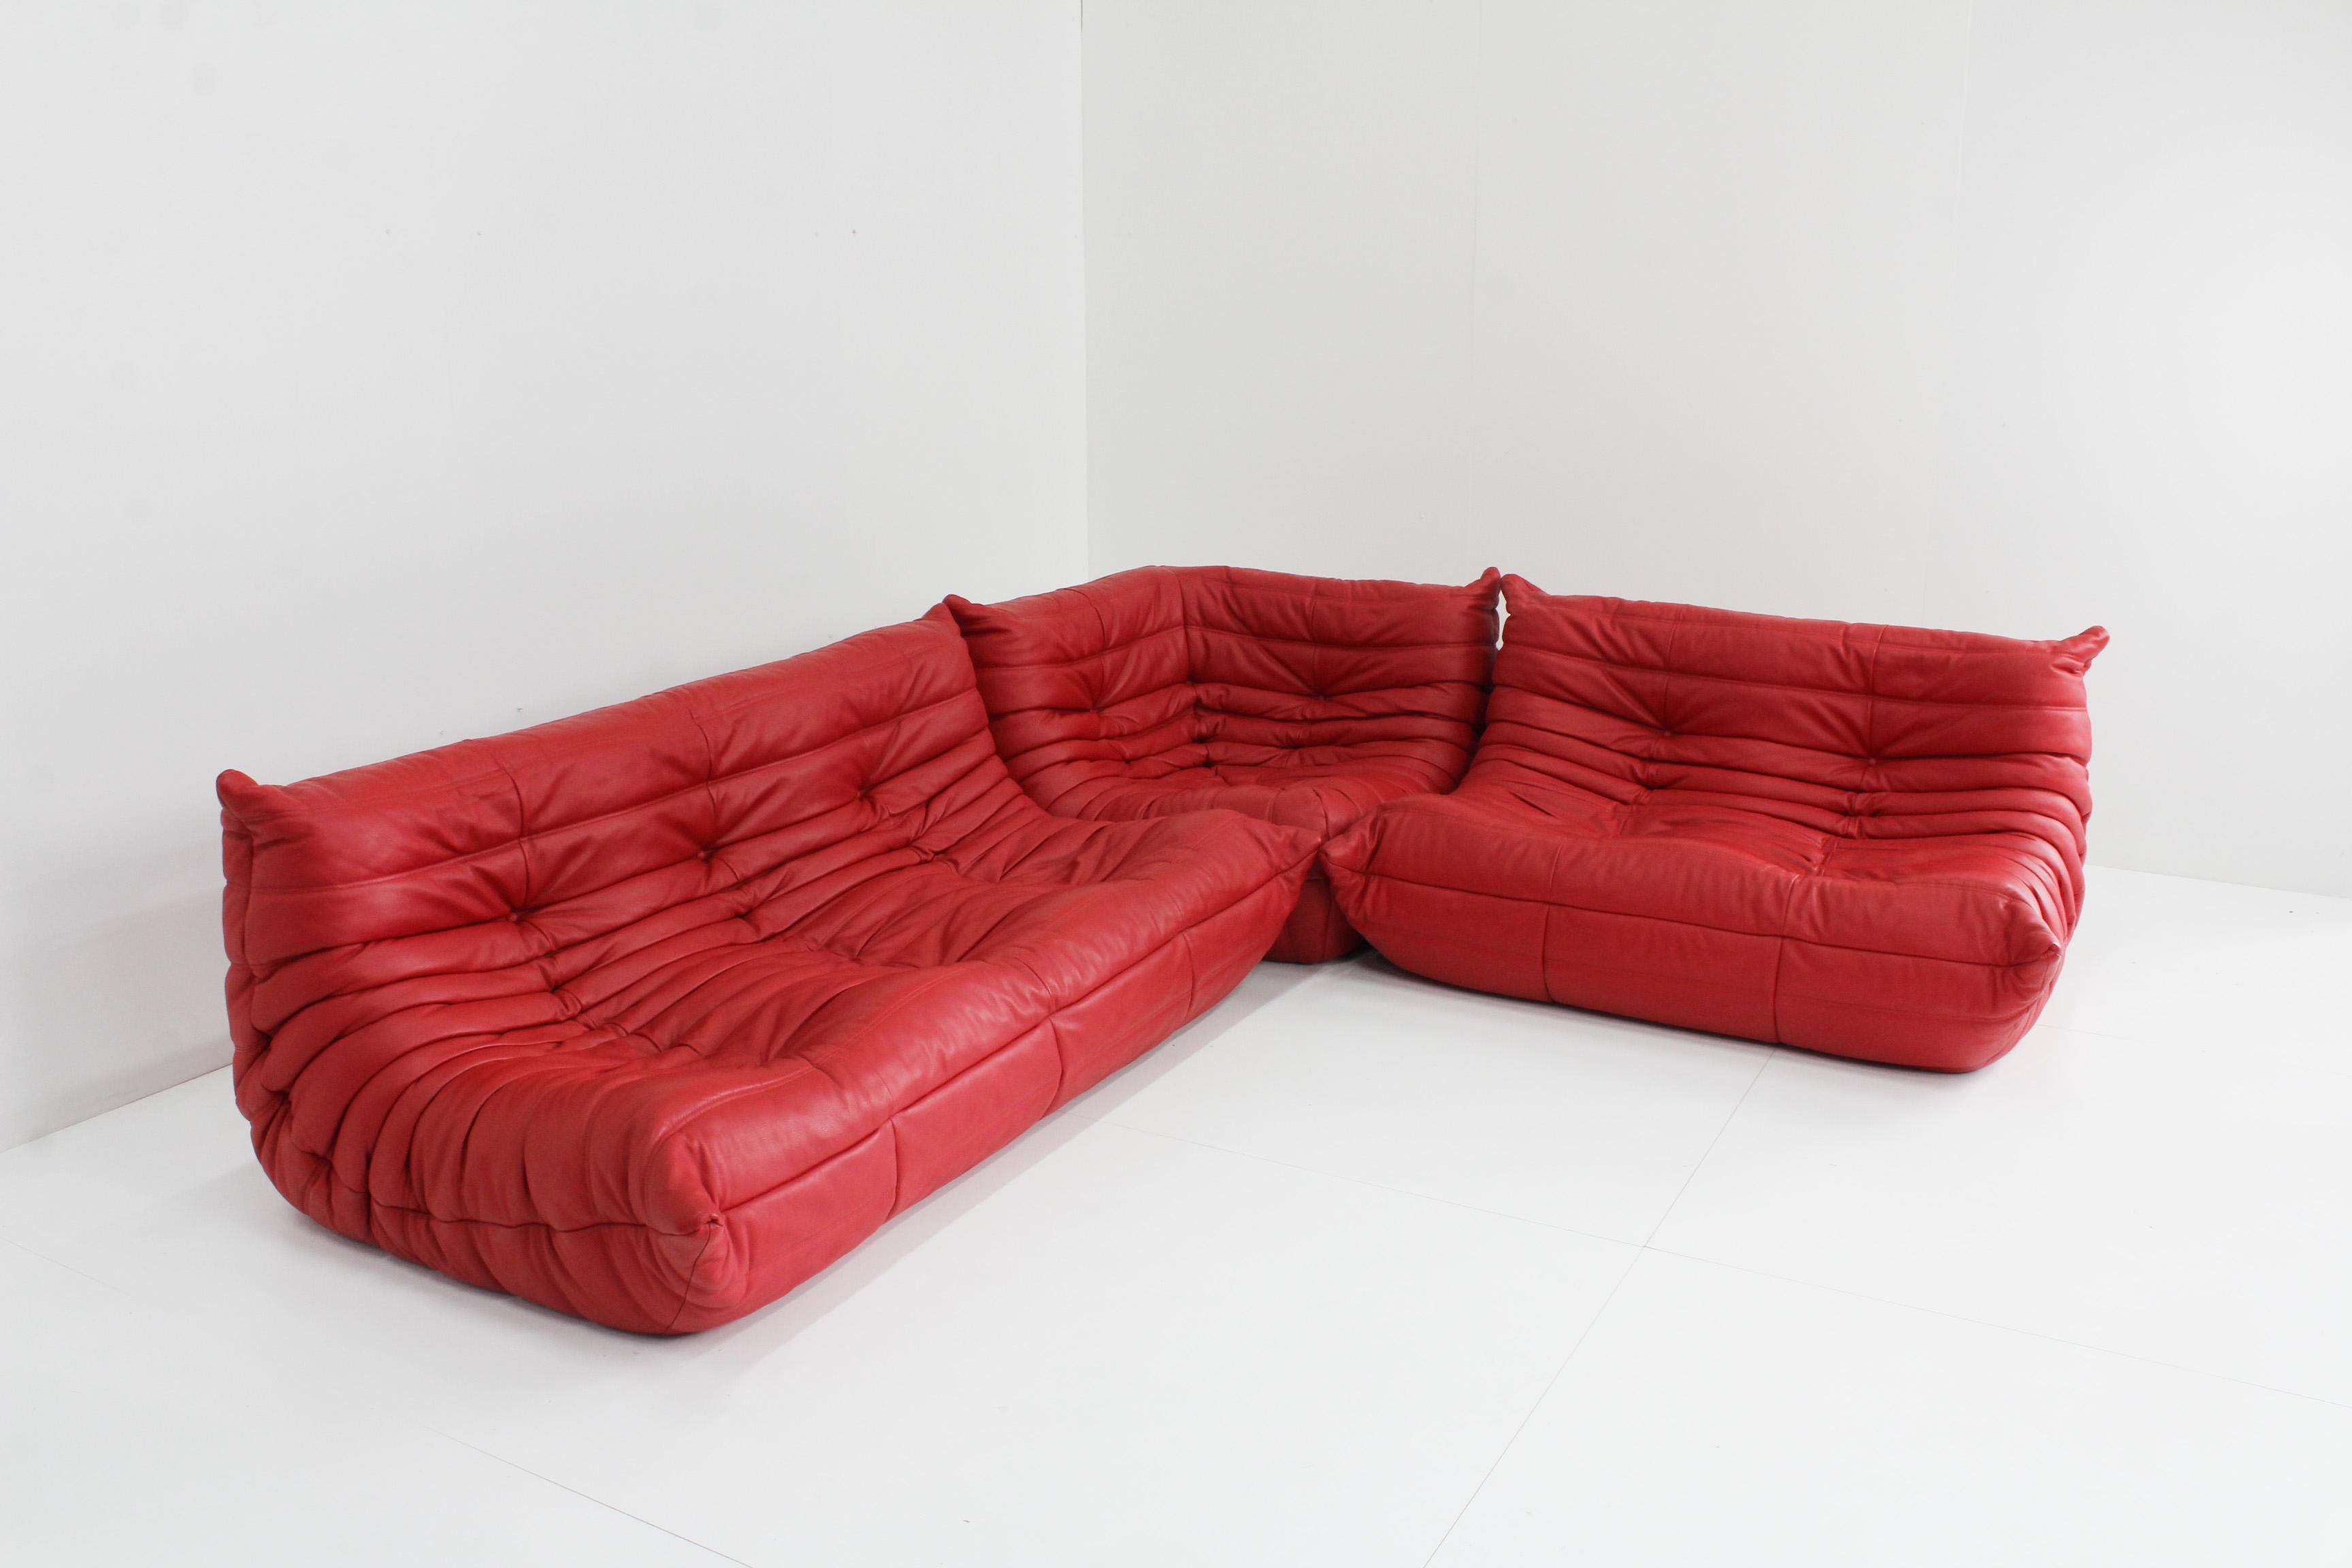 Original red leather Togo sofa set from Ligne Roset by Michel Ducaroy. This is an original piece in high quality leather. 

The sets consist of a 3 seater, 2 seater and corner. 

Condition: very good condition, on the entire set there is one